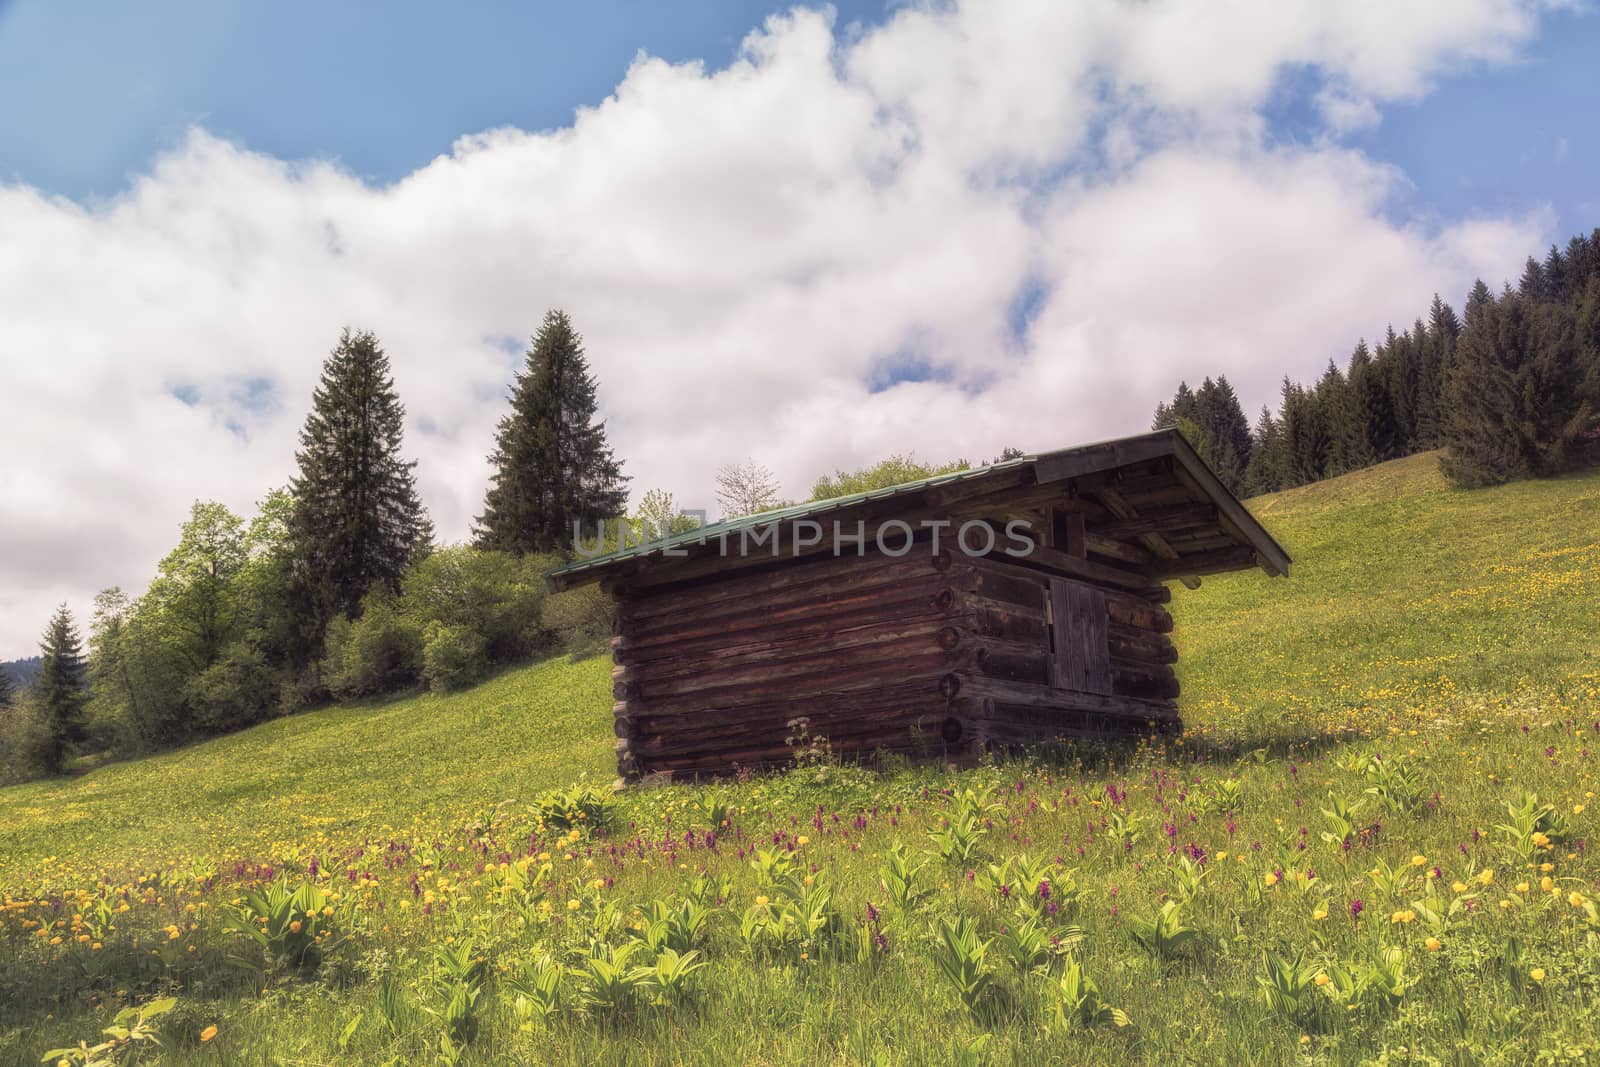 A small wooden hut surrounded by a green meadow